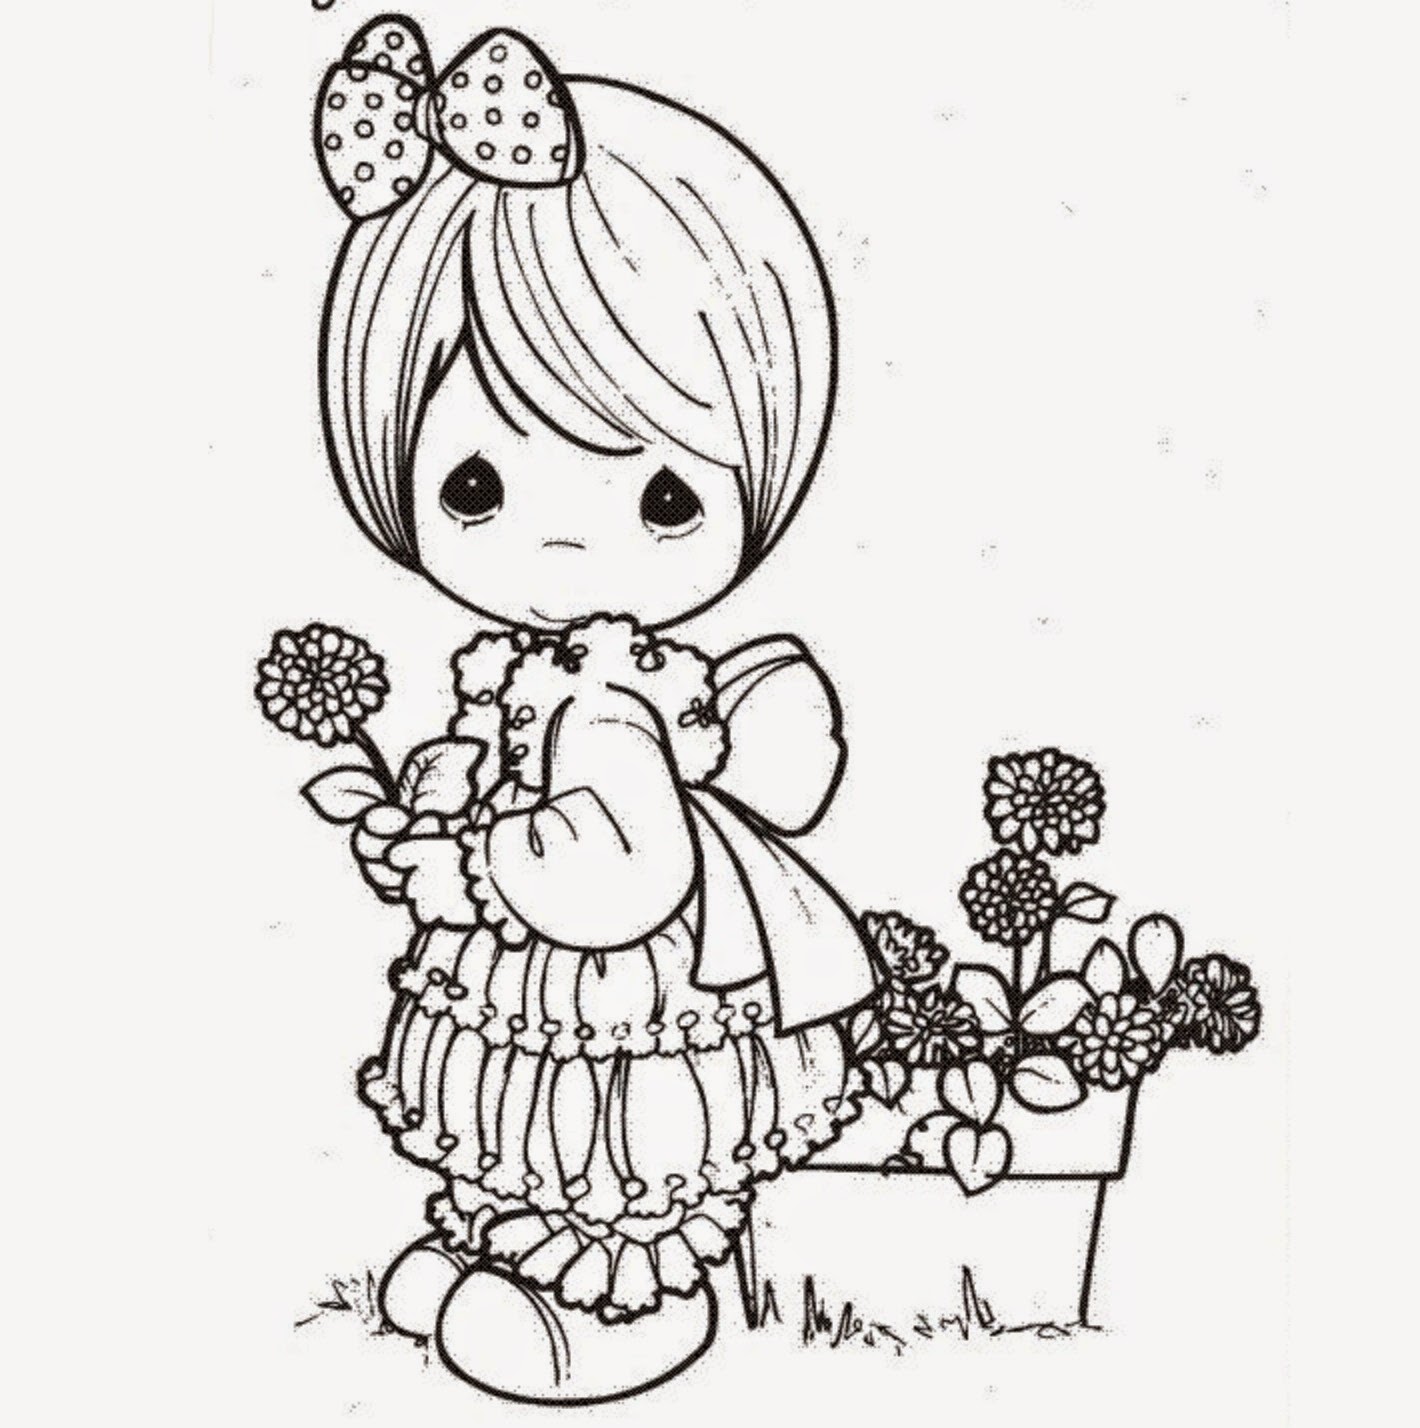 Download colours drawing wallpaper: Beautiful Precious Moments Girl Coloring Page for Kids of a Cute ...